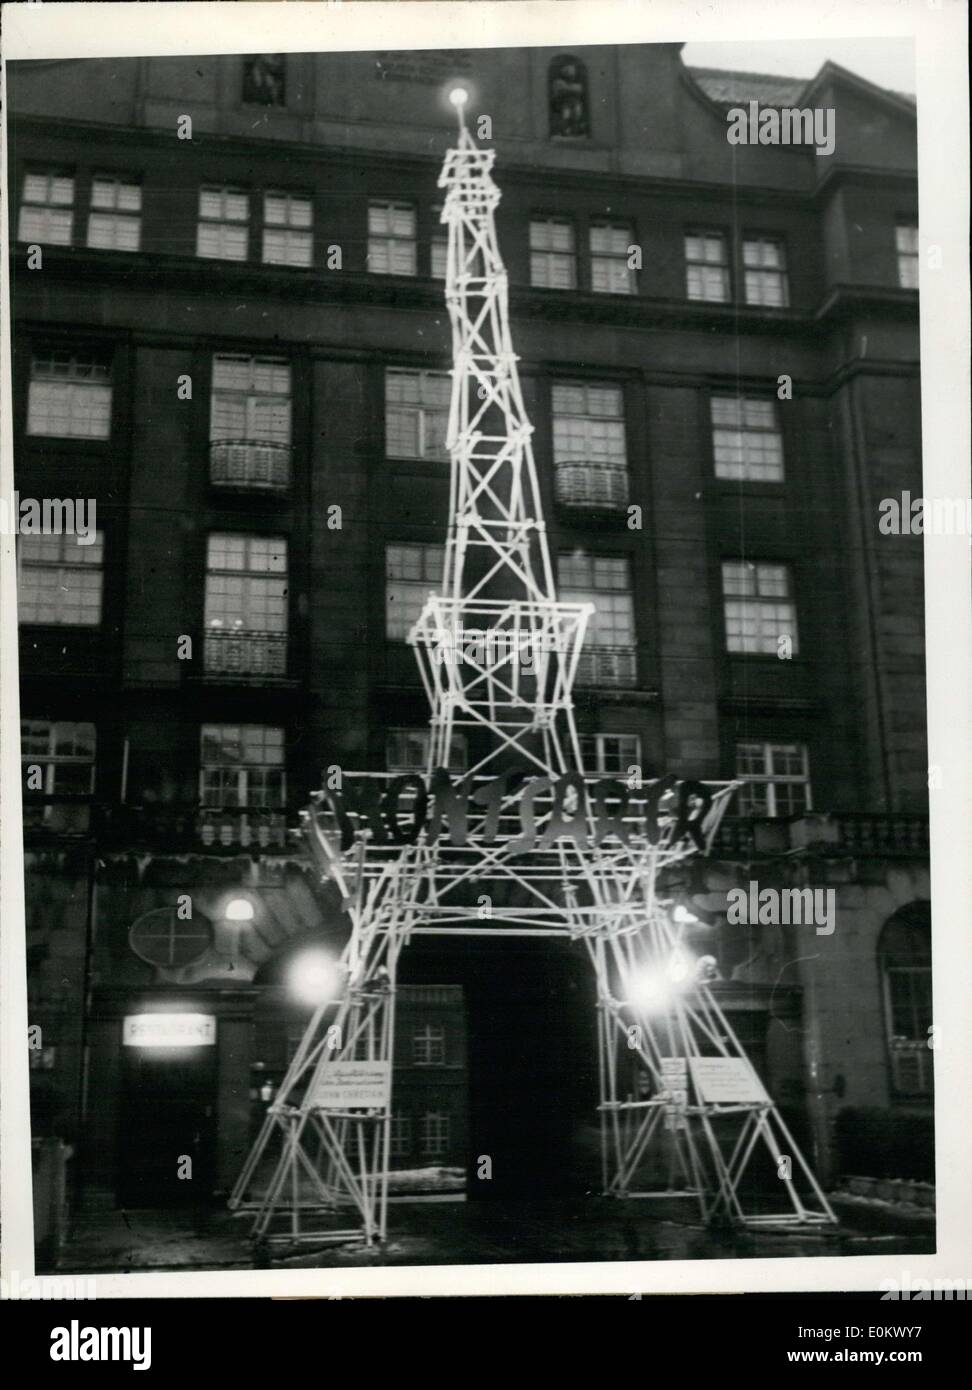 Jan. 30, 1952 - Paris comes to the Alster! A miniature Eiffel Tower was displayed before the Curio-House as an emblem of the huge, soon-to-occur art-festival ''Monsartre'' in Hamburg. Jean Paul Sartre, Simone de Beauvoir, and other Parisian guests were invited to the festival, which is under the protectorate of the French consul general of Nerciat. Stock Photo